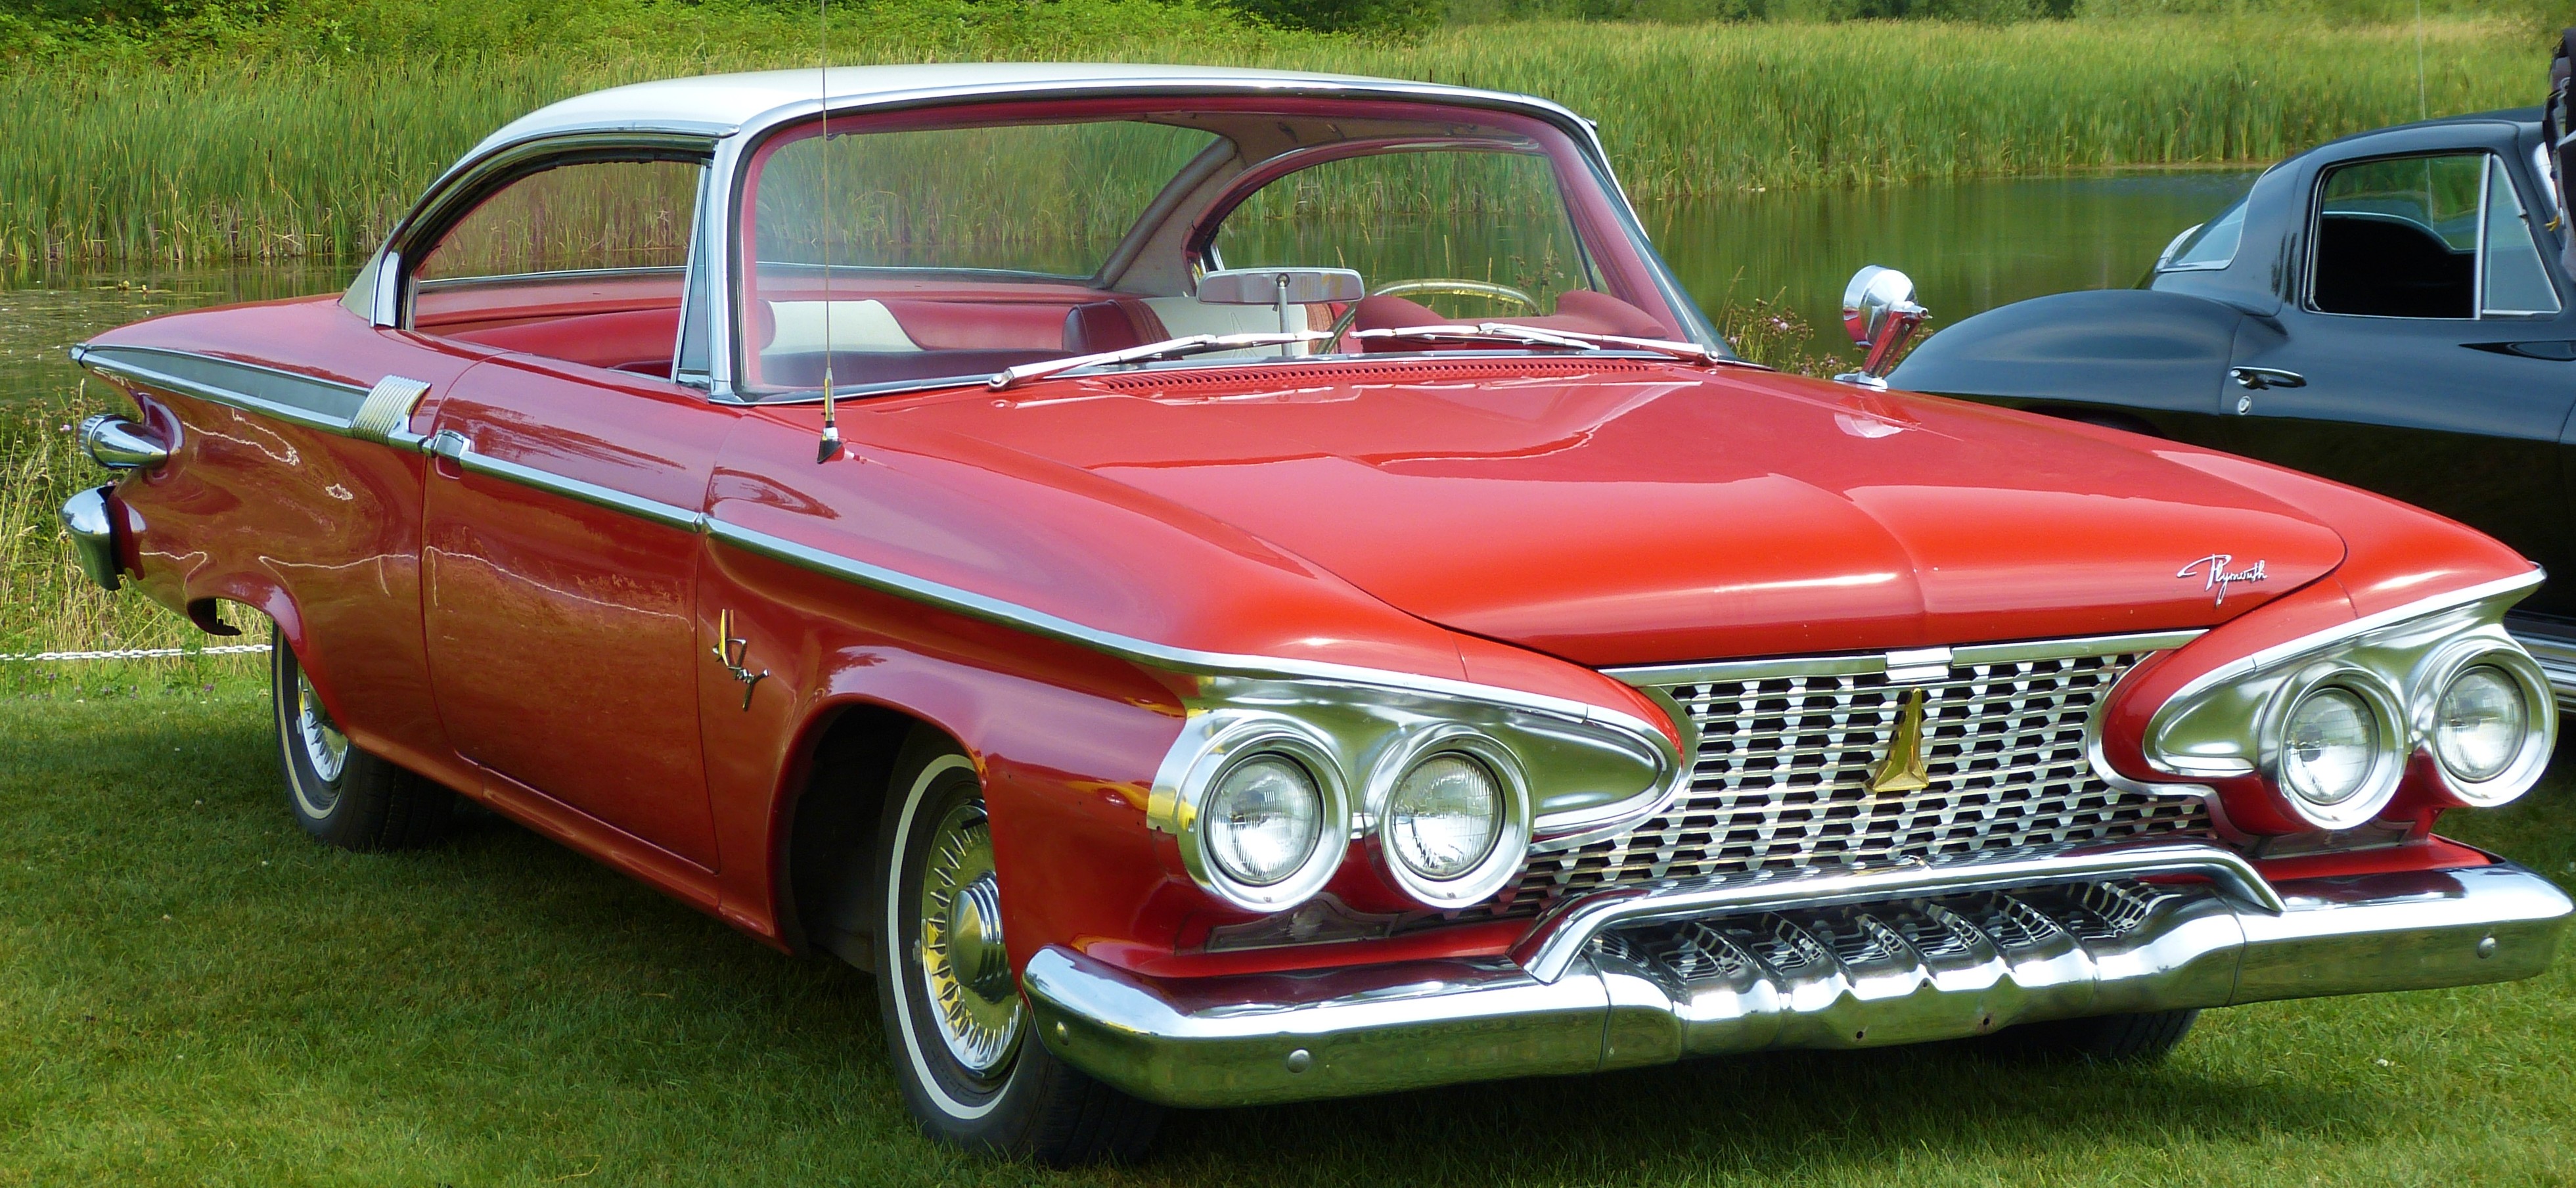 1961 Plymouth Fury Coupe Pics, Vehicles Collection